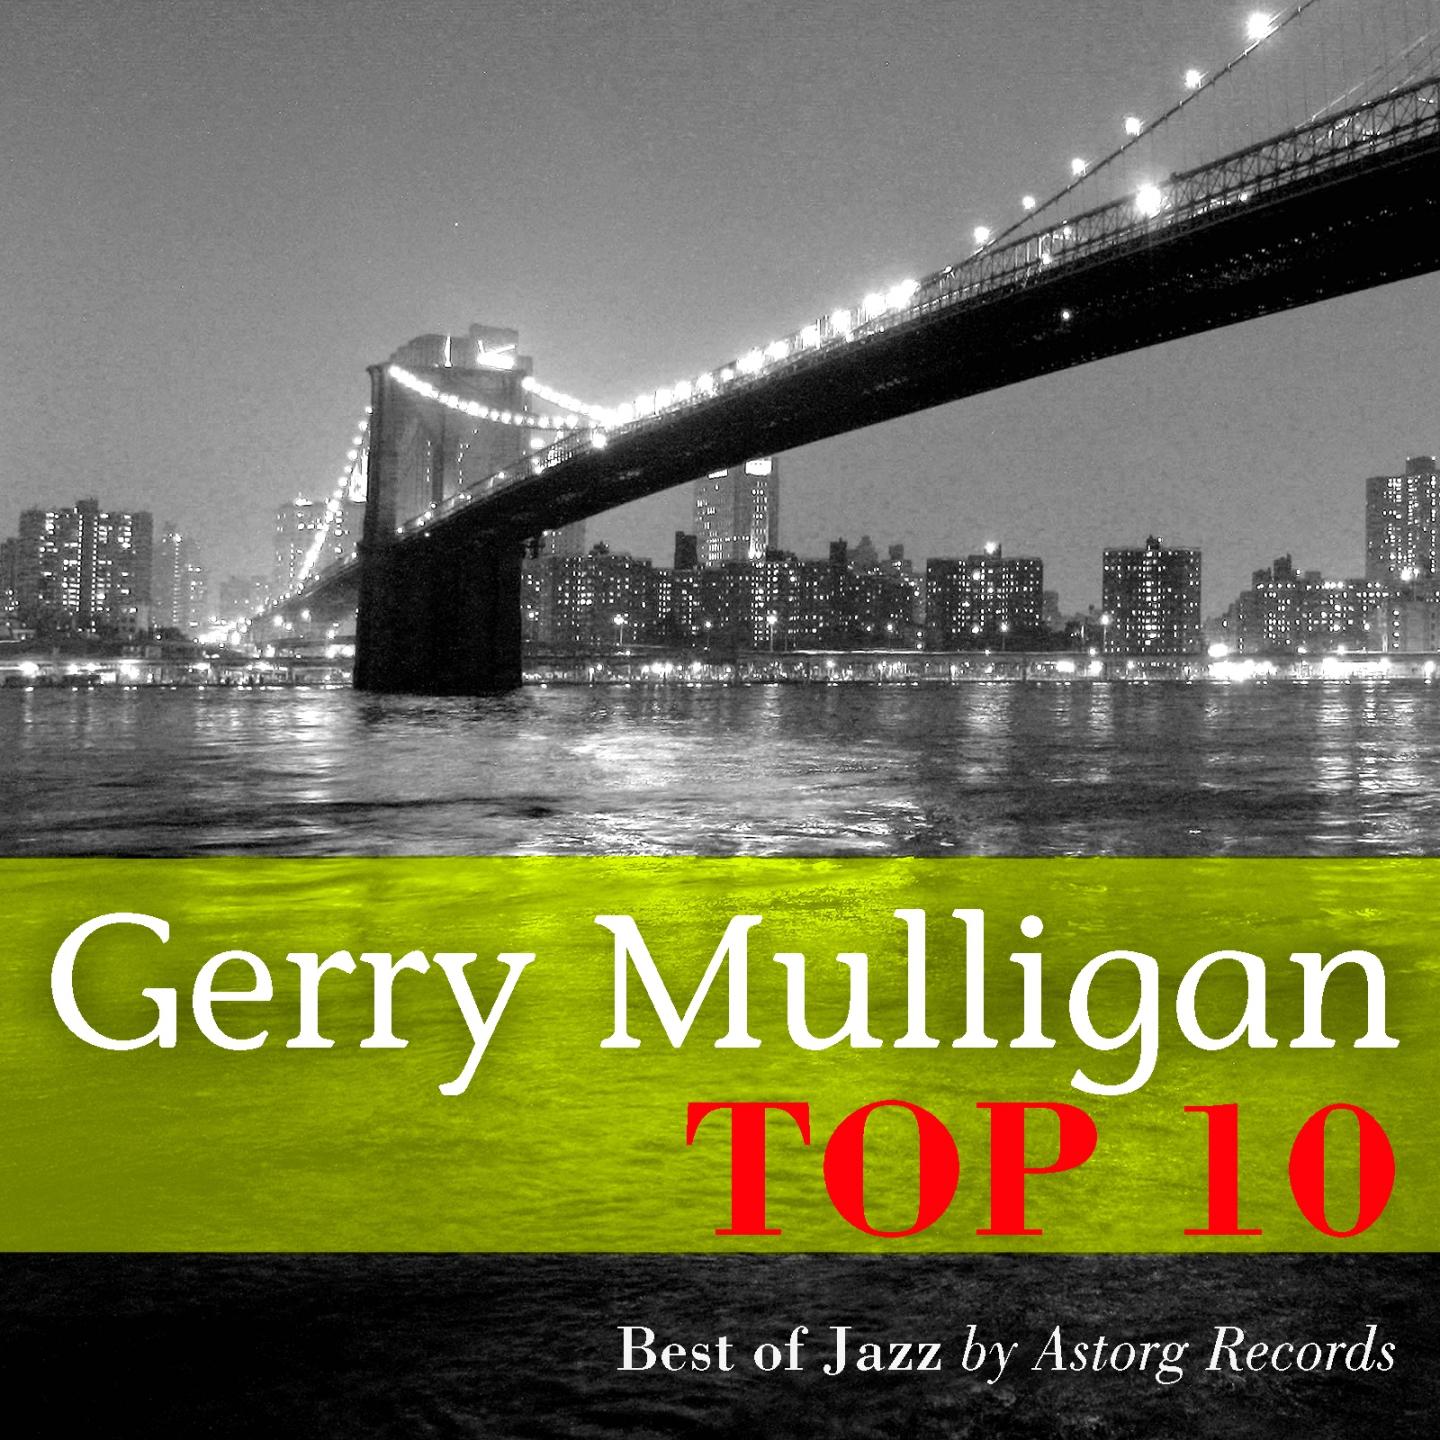 Gerry Mulligan Relaxing Top 10 (Relaxation & Jazz)